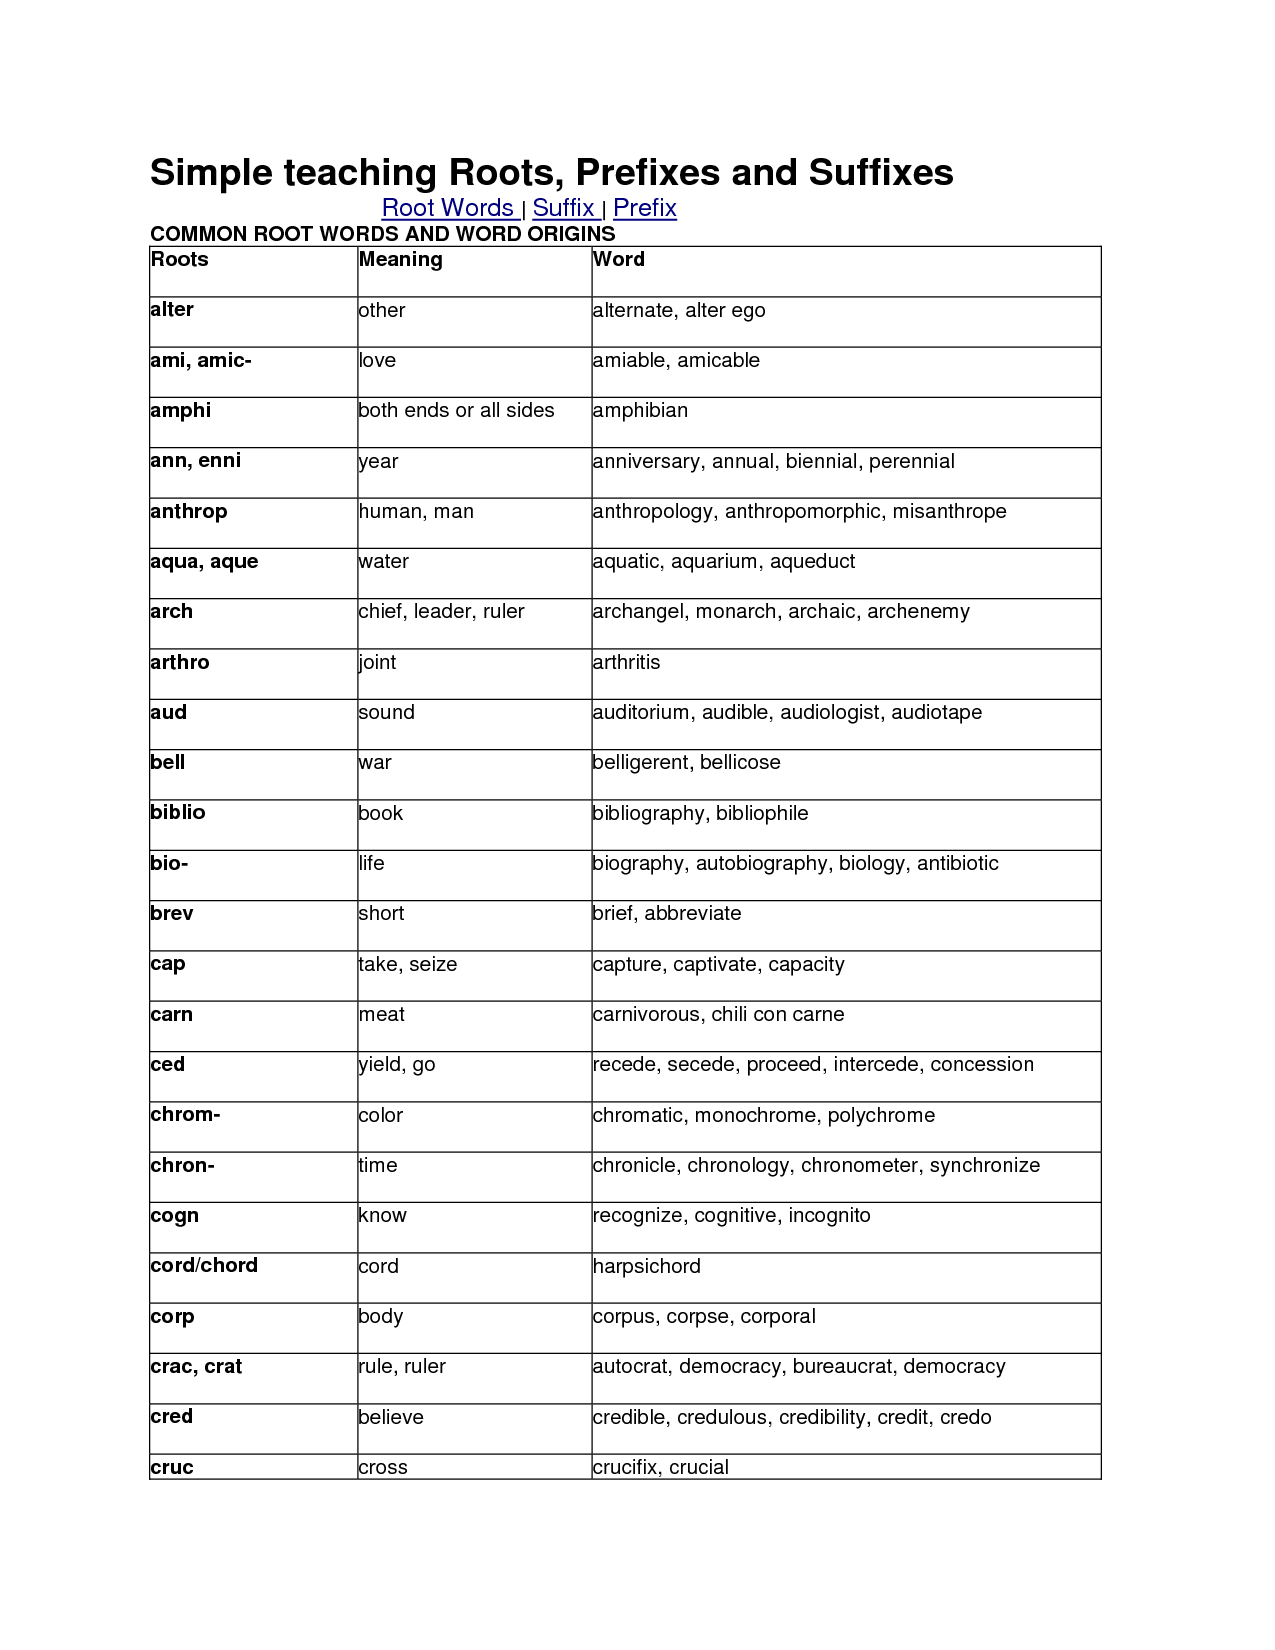 ROOT-WORDS Prefix and Suffix Worksheets Image